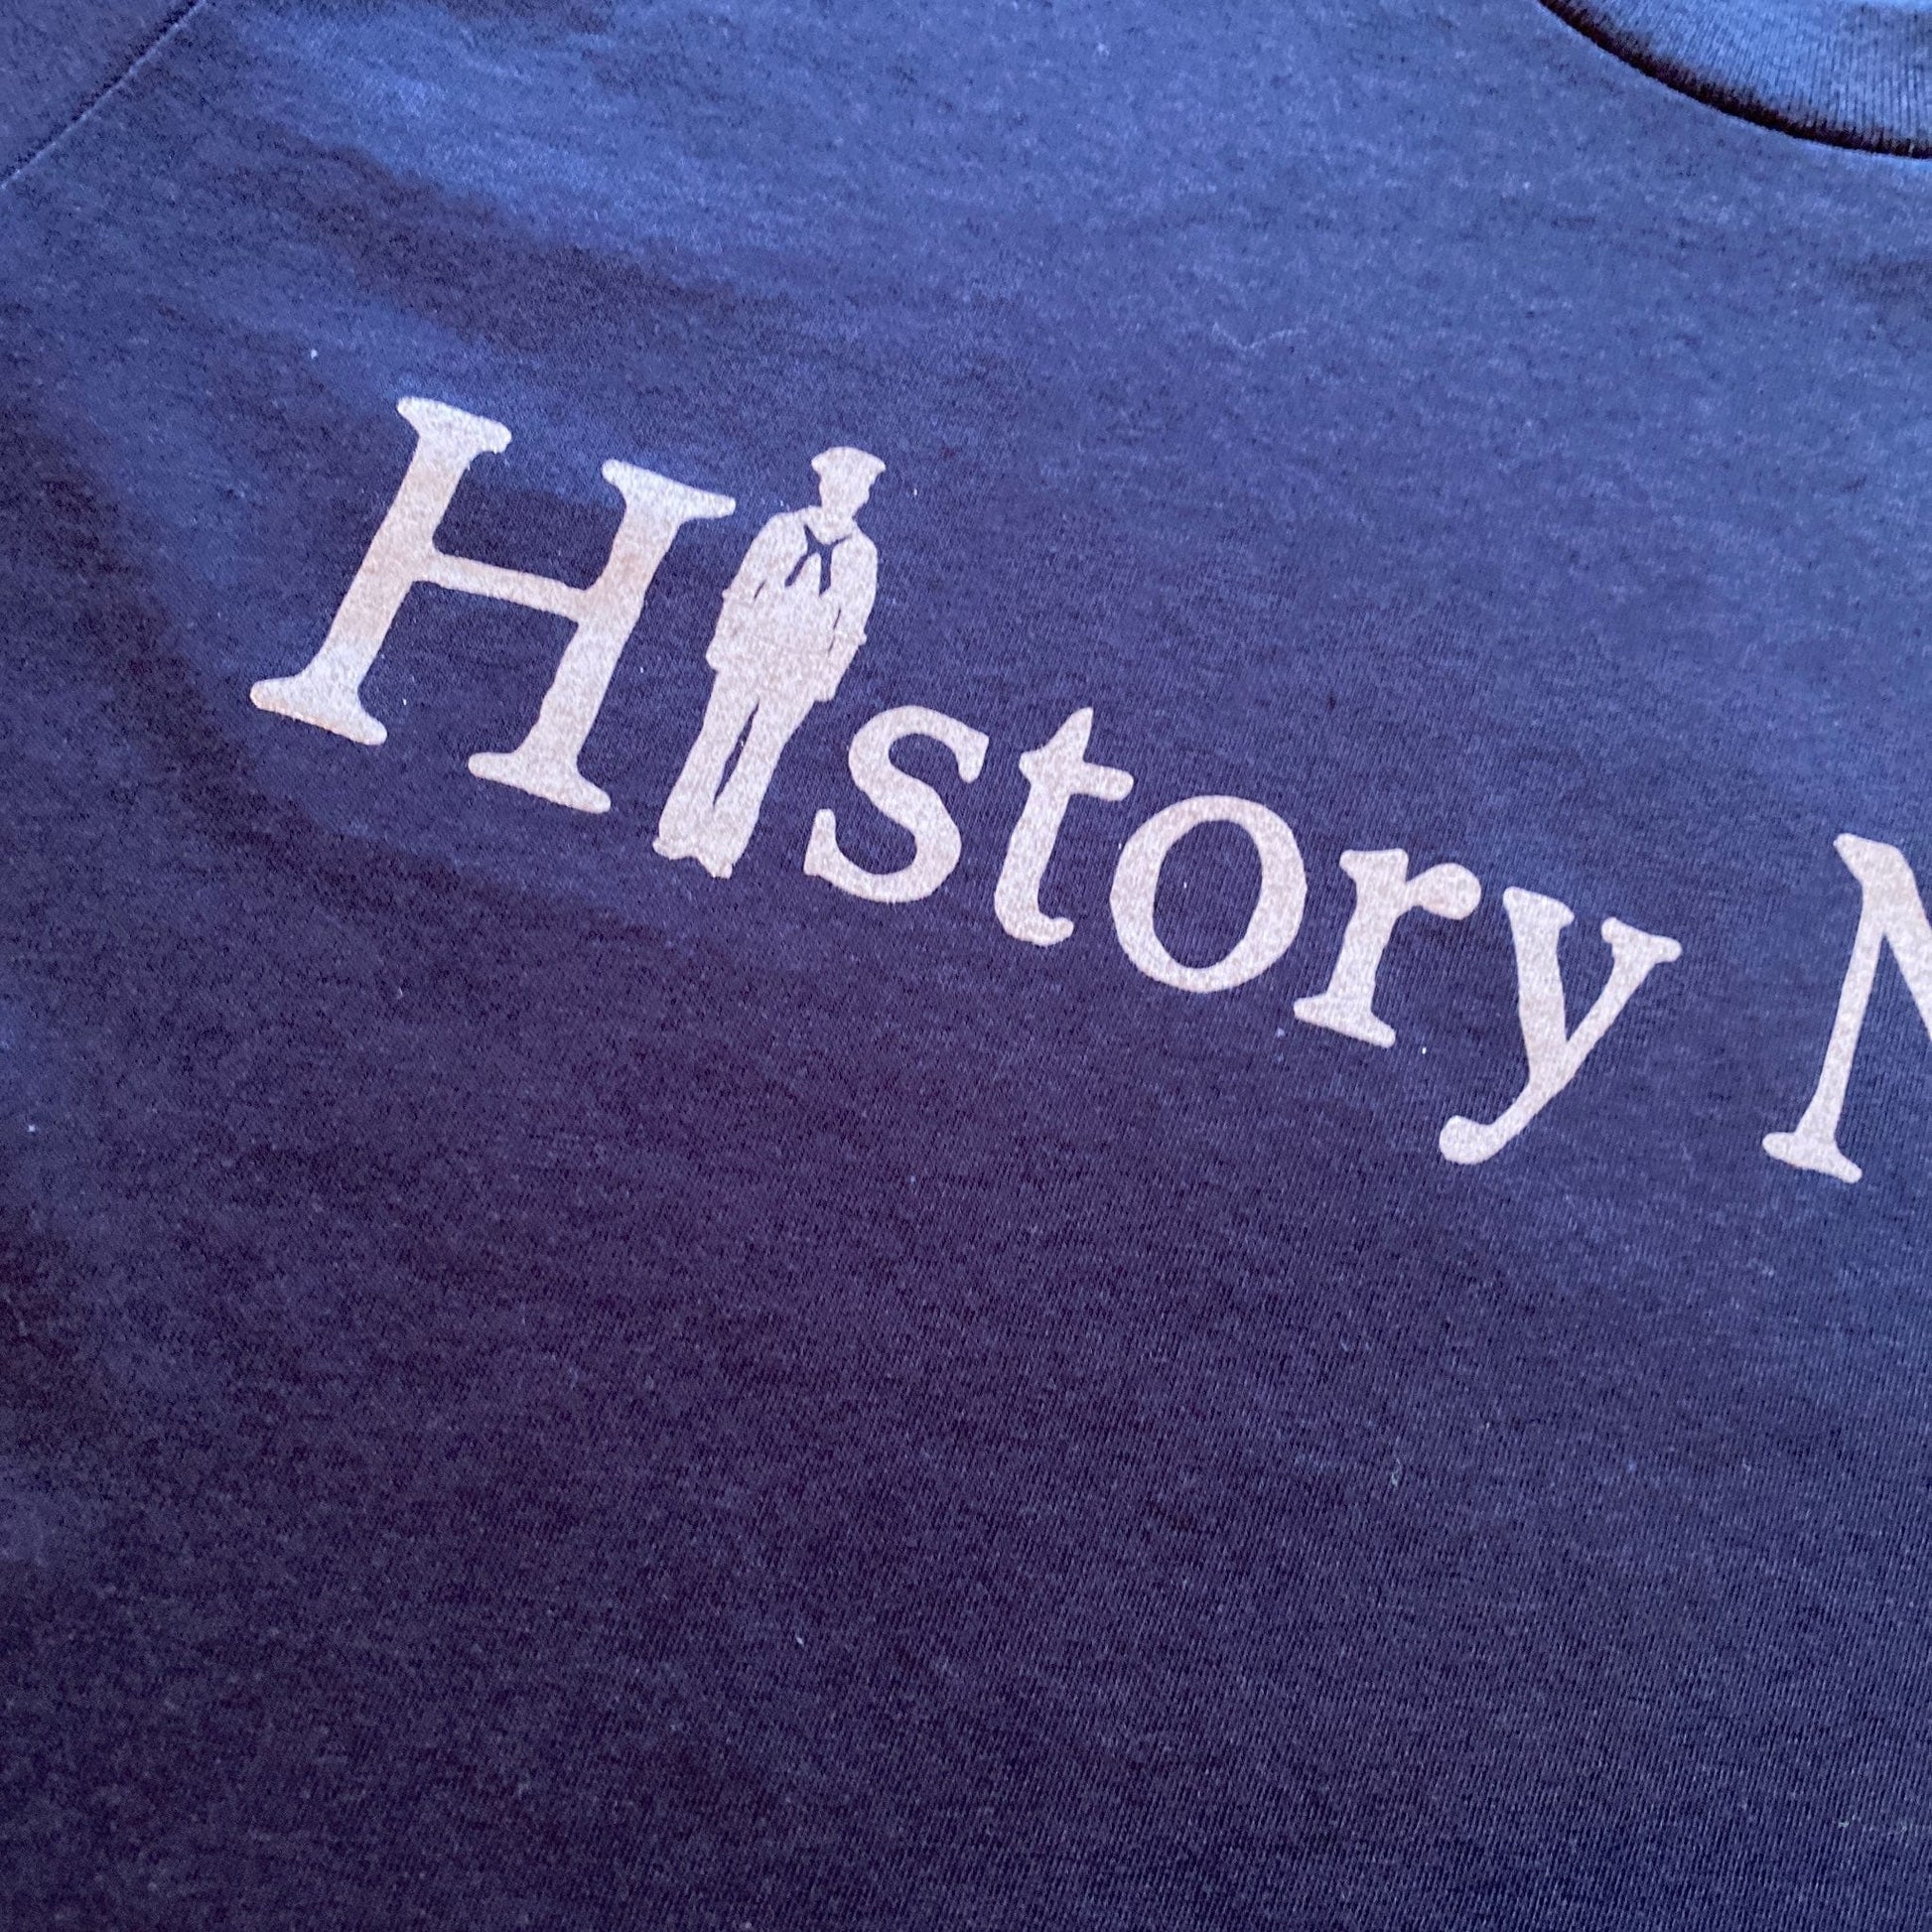 Front Close-up “History Nerd” Pearl Harbor shirt with WWII sailor and historic flag from the History List Store